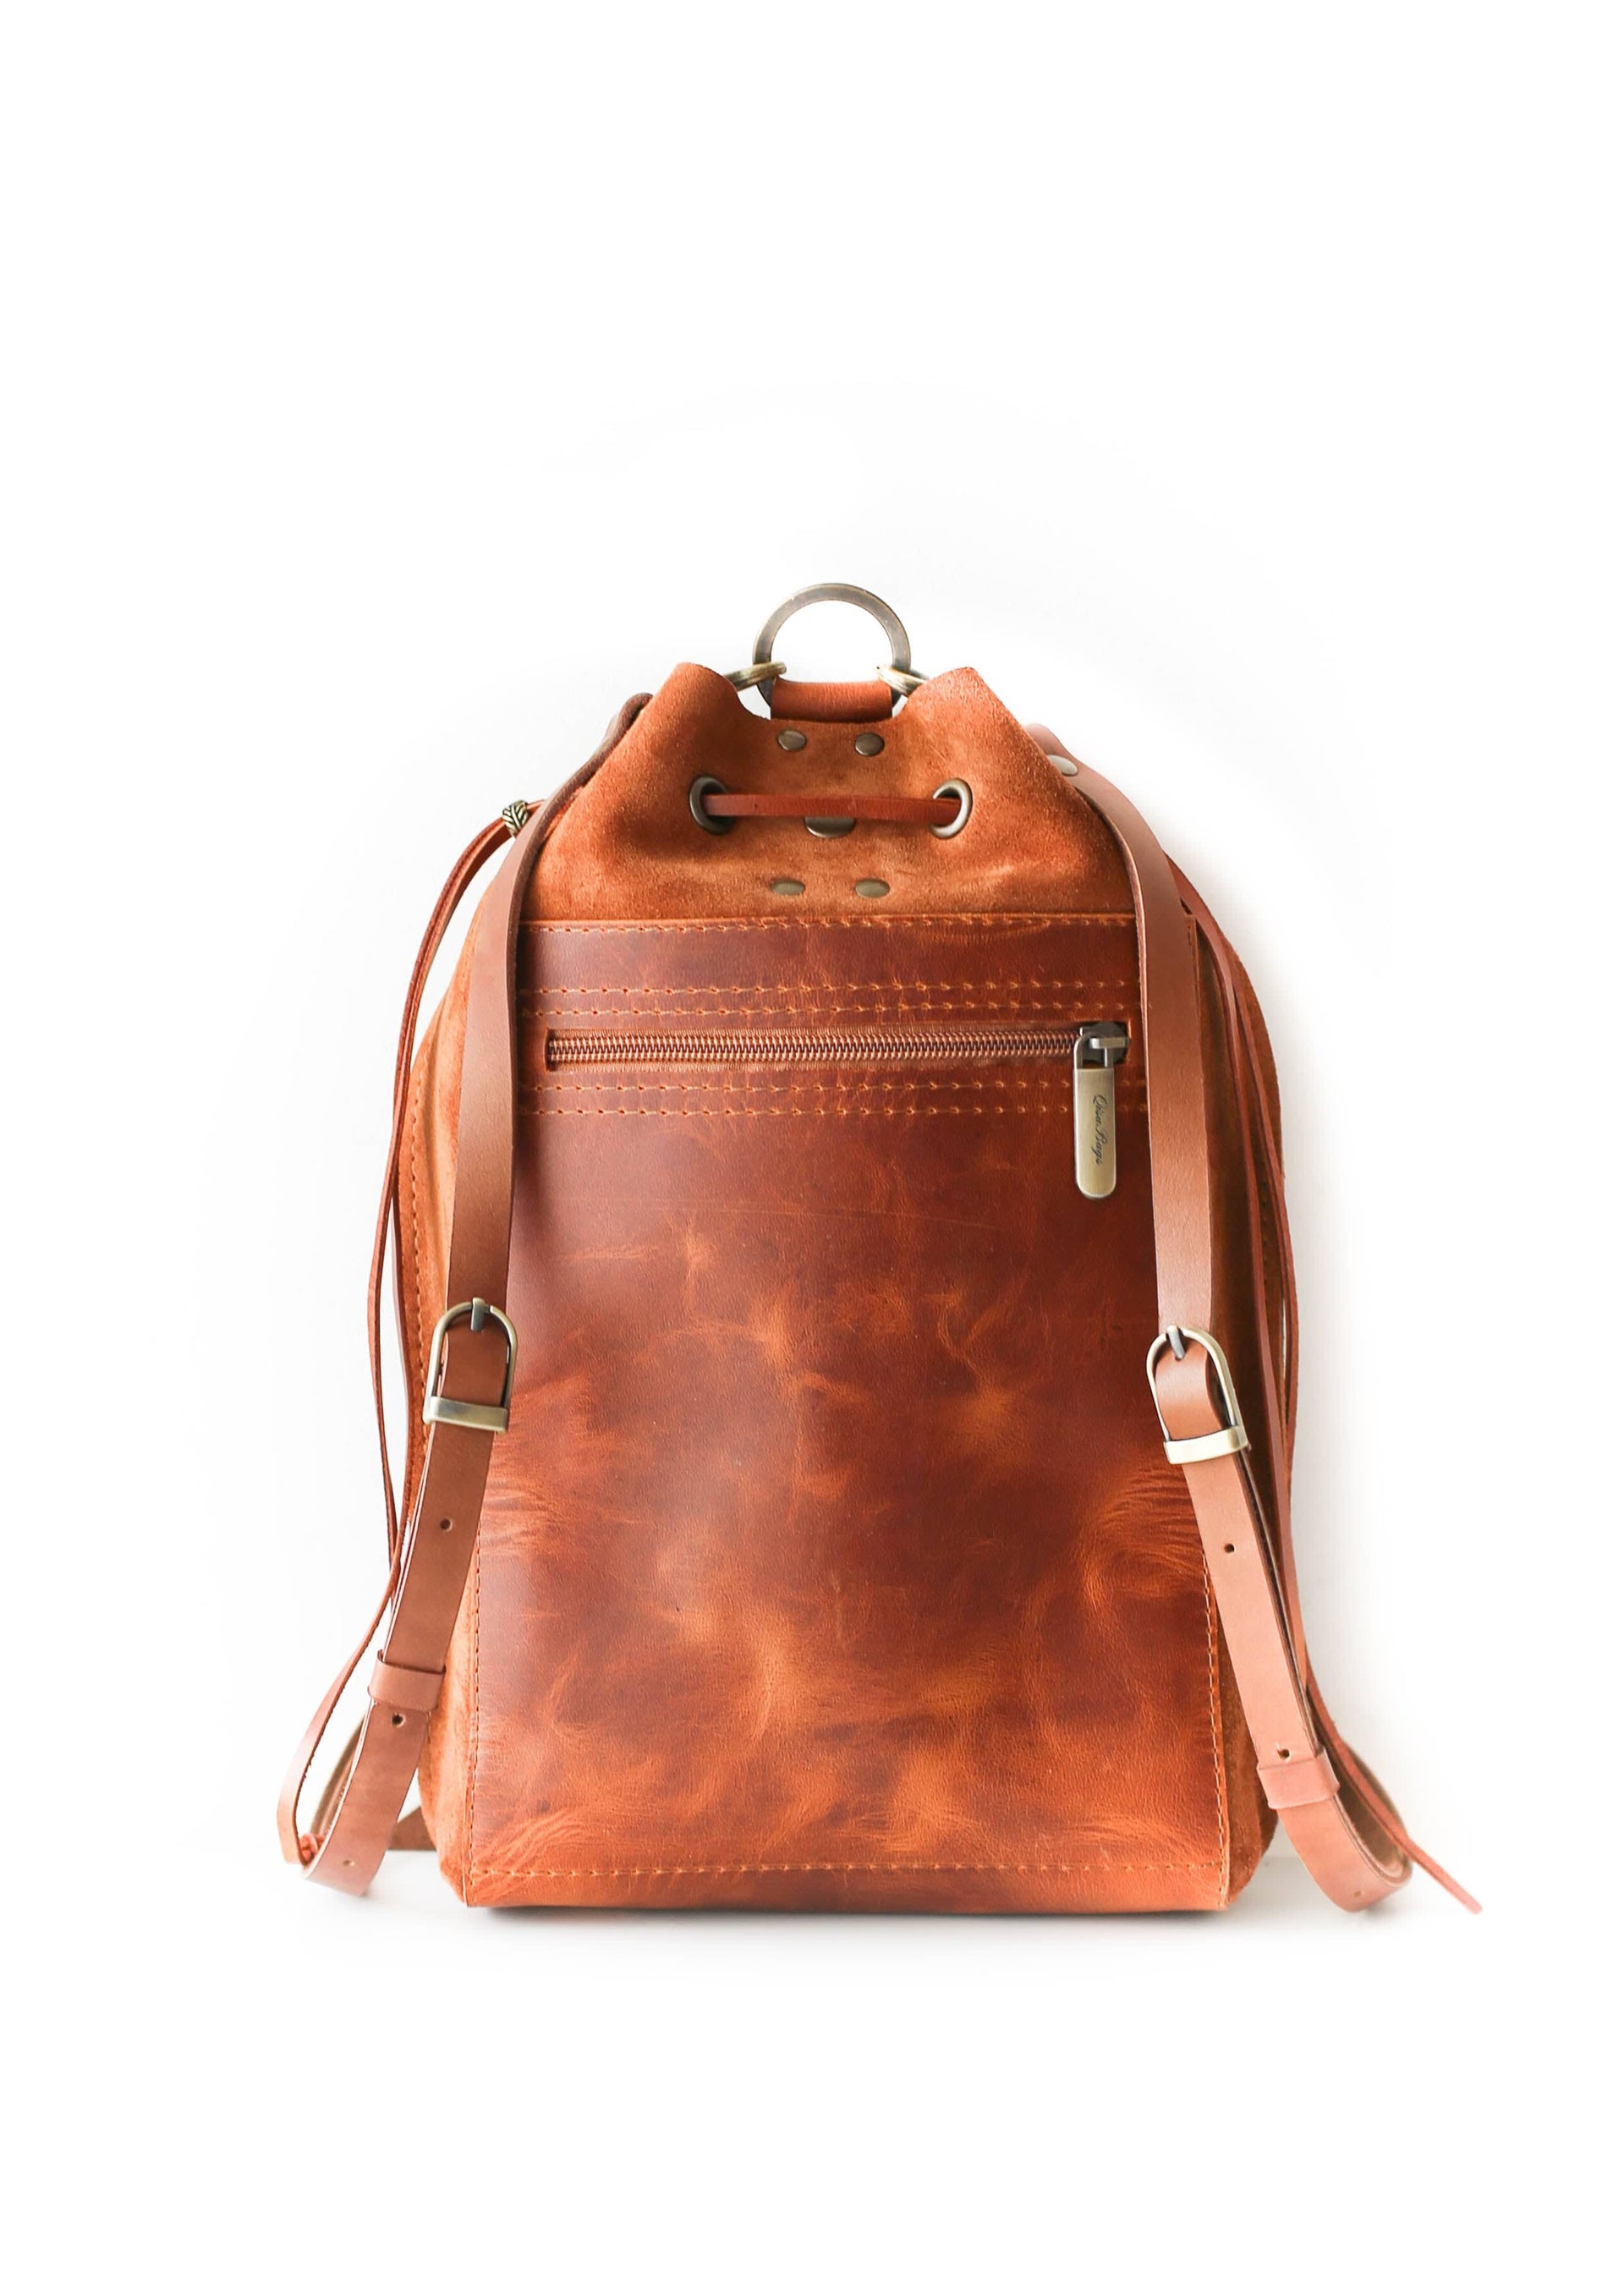 Brown leather Backpack